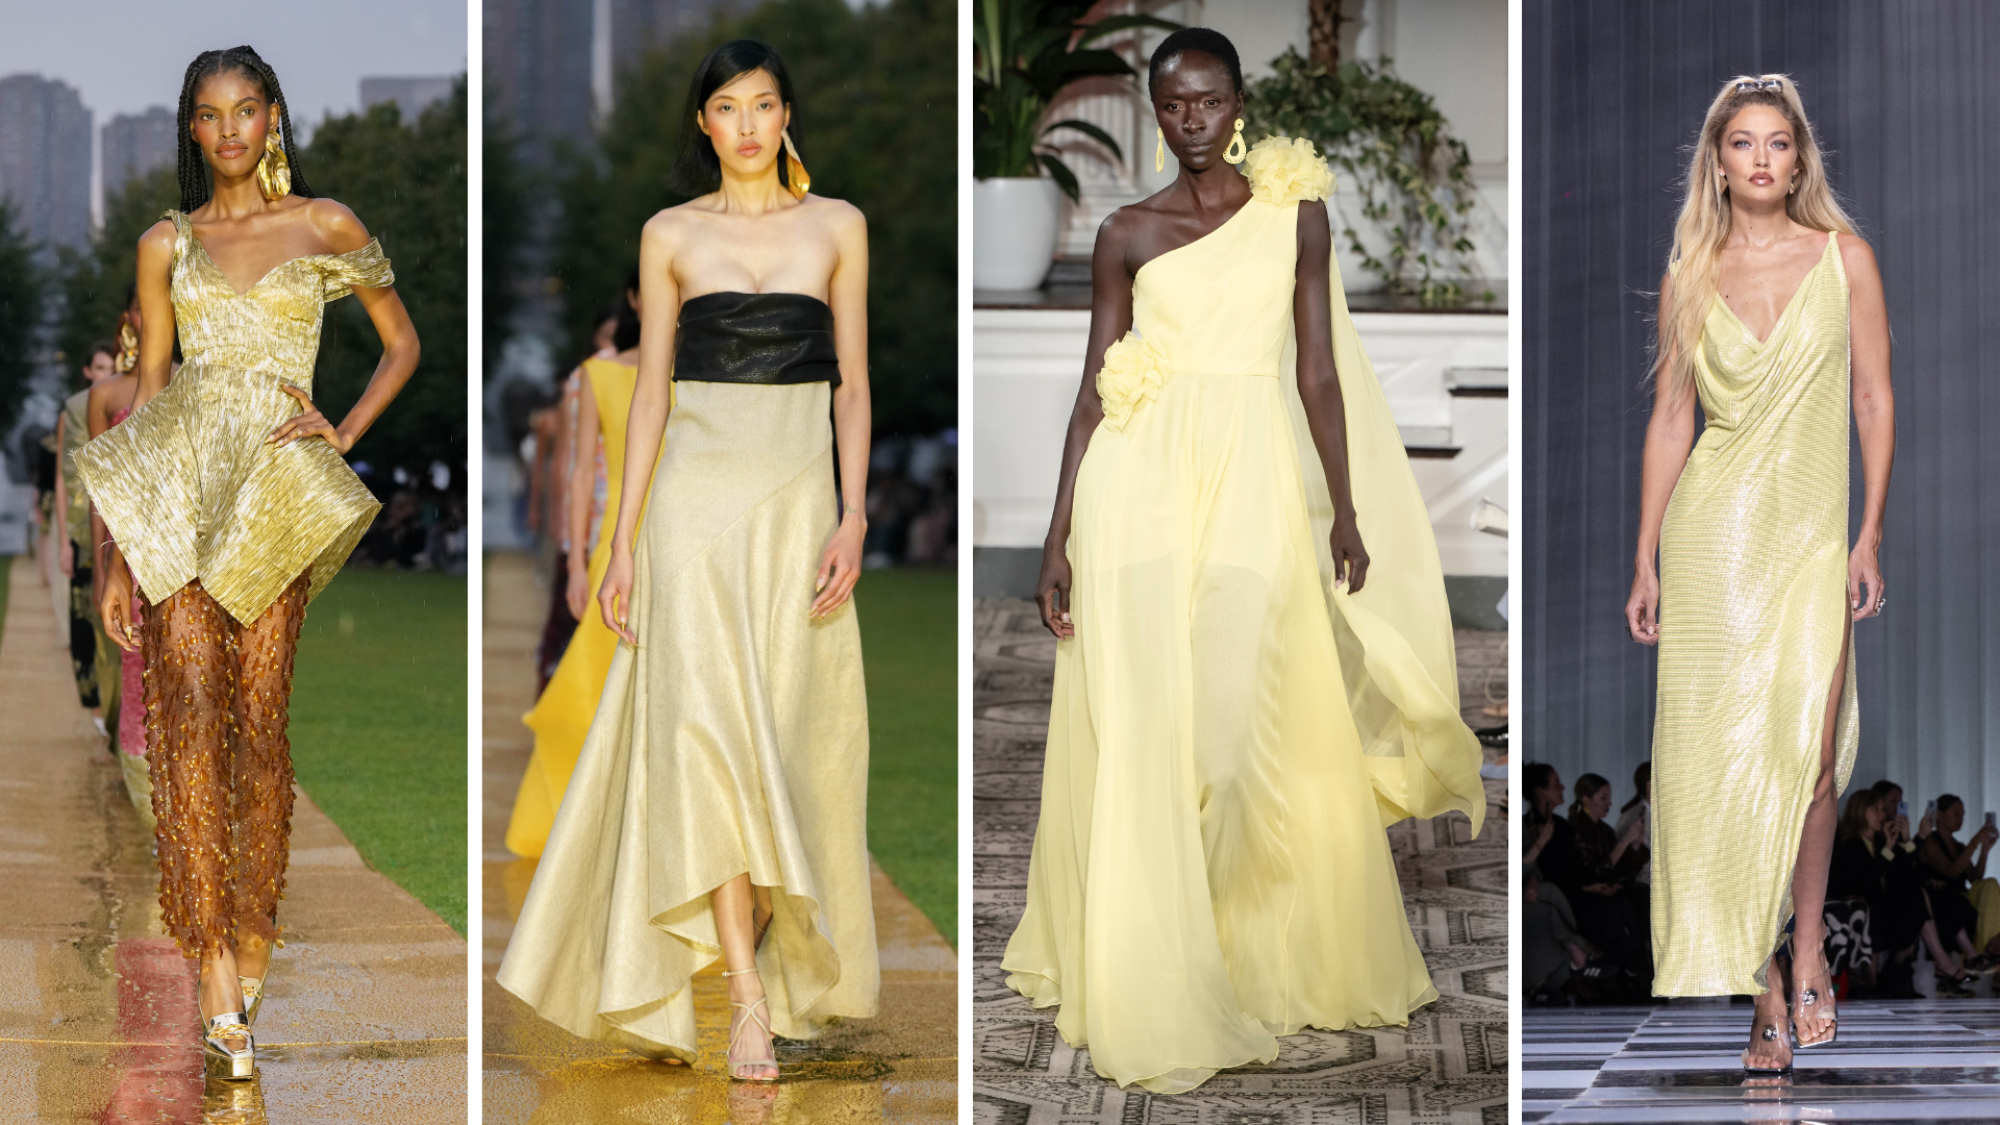 Four photos of women in yellow dresses